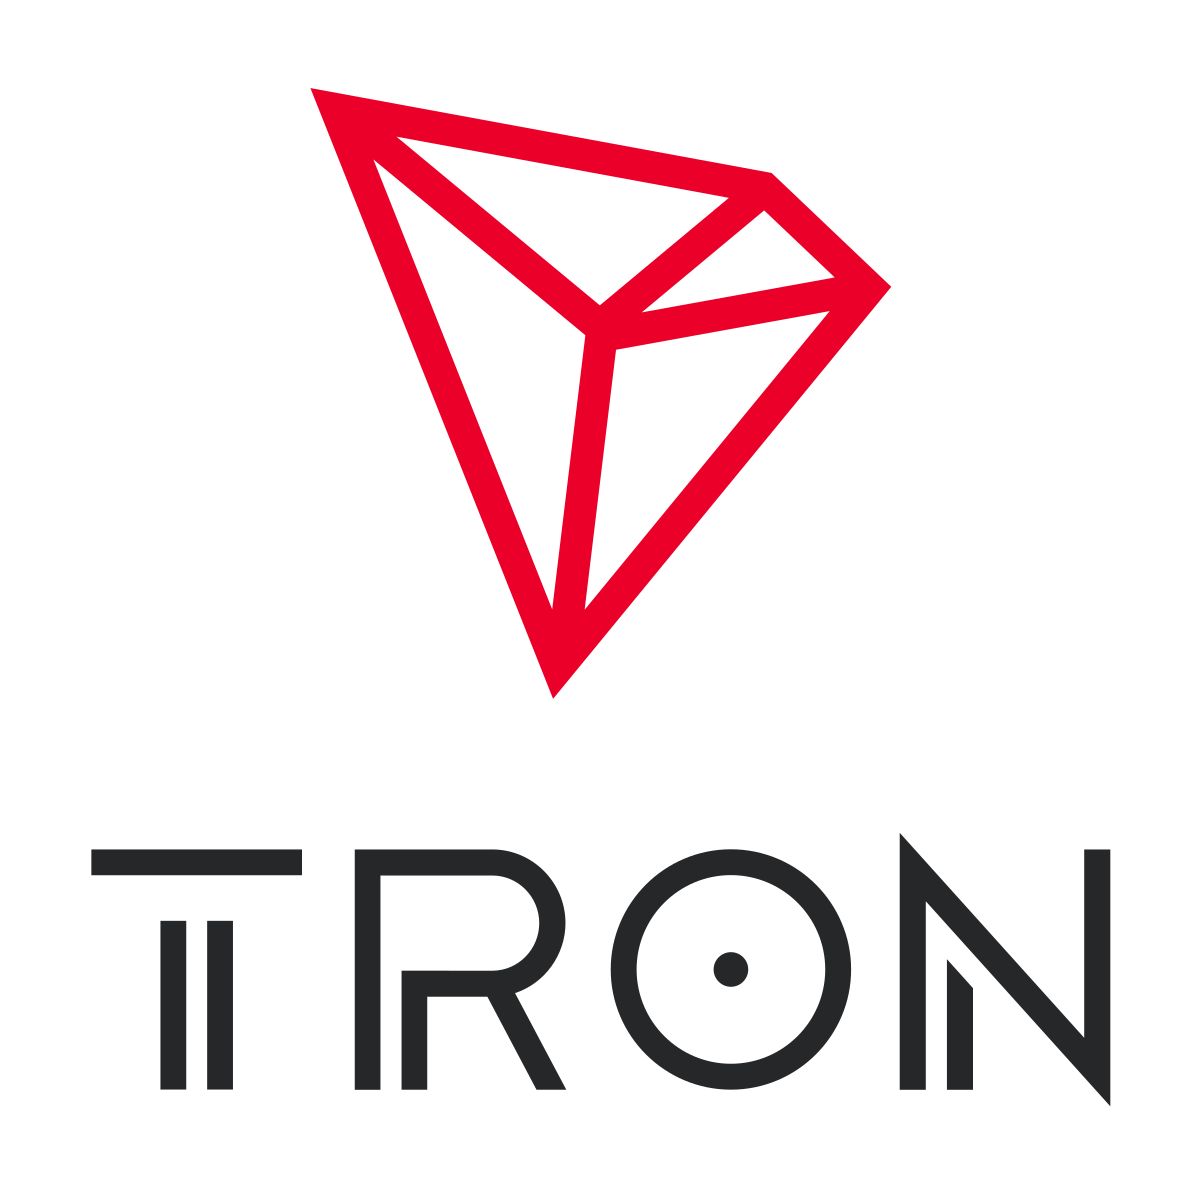 What Is Tron Cryptocurrency